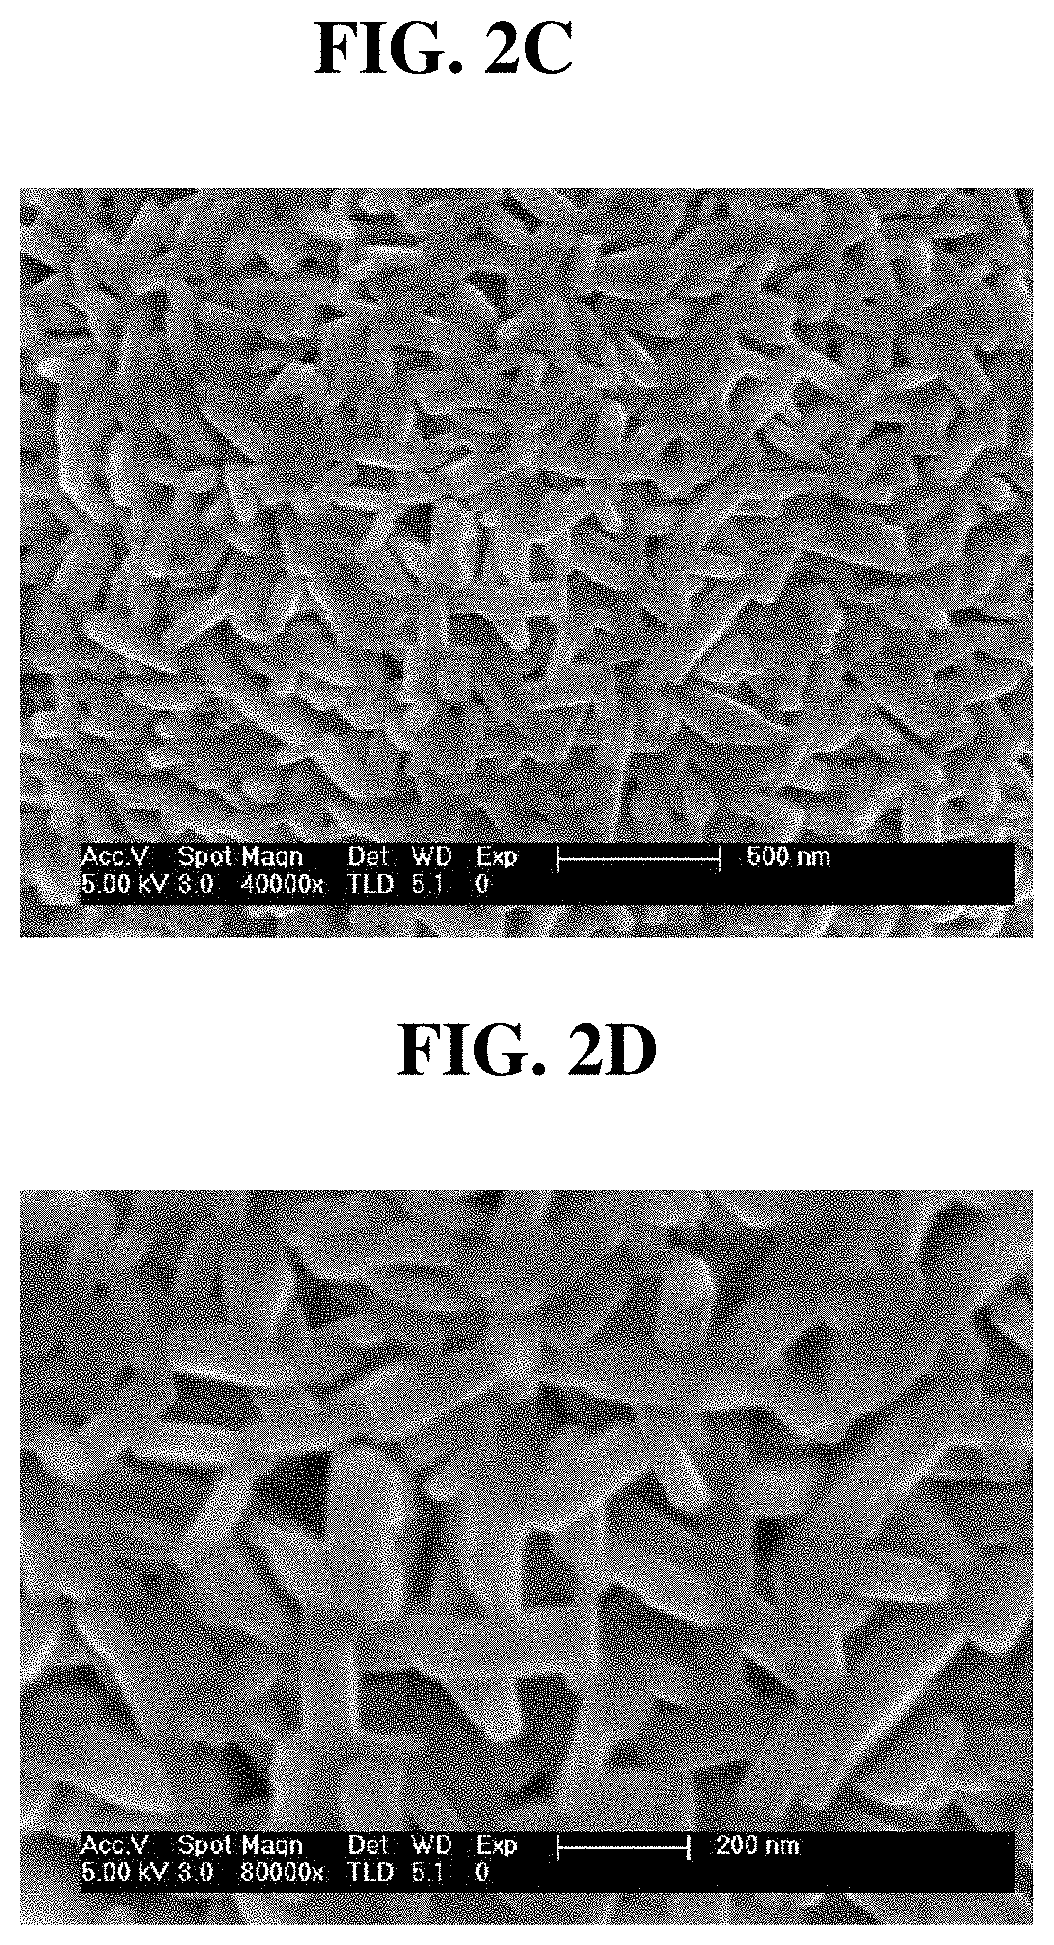 Nickel-based active material precursor for lithium secondary battery, method of preparing the same, nickel-based active material for lithium secondary battery formed therefrom, and lithium secondary battery including positive electrode including nickel-based active material